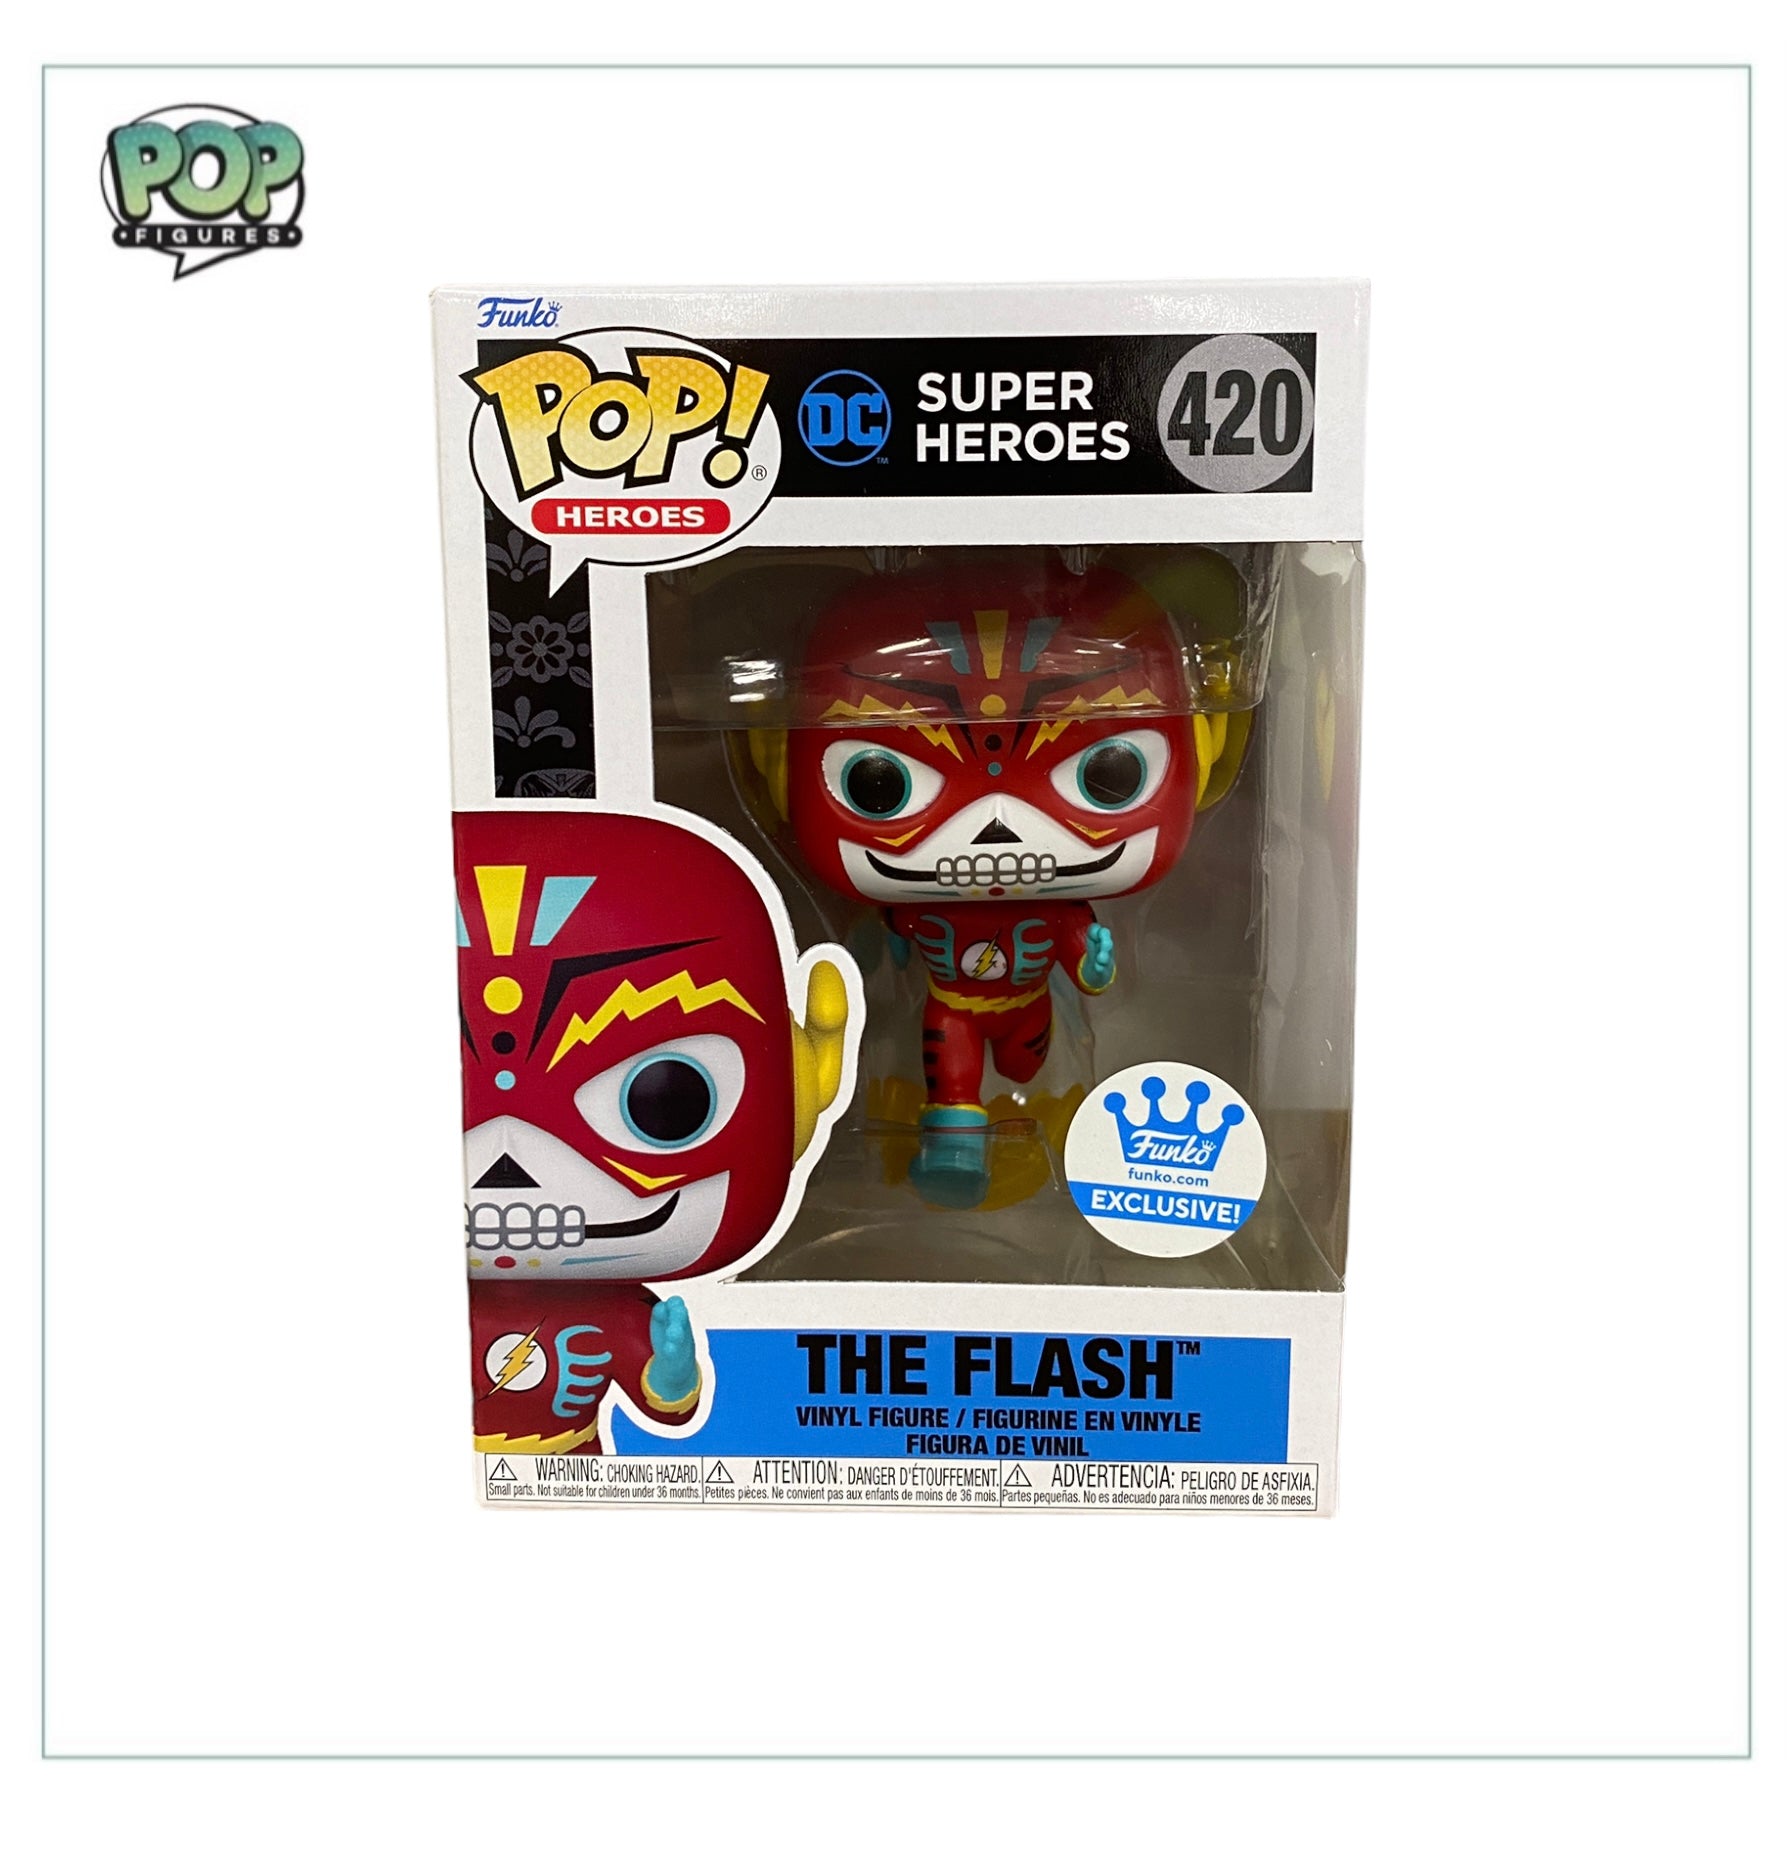 The Flash #420 - DC Heroes - Funko Shop Exclusive